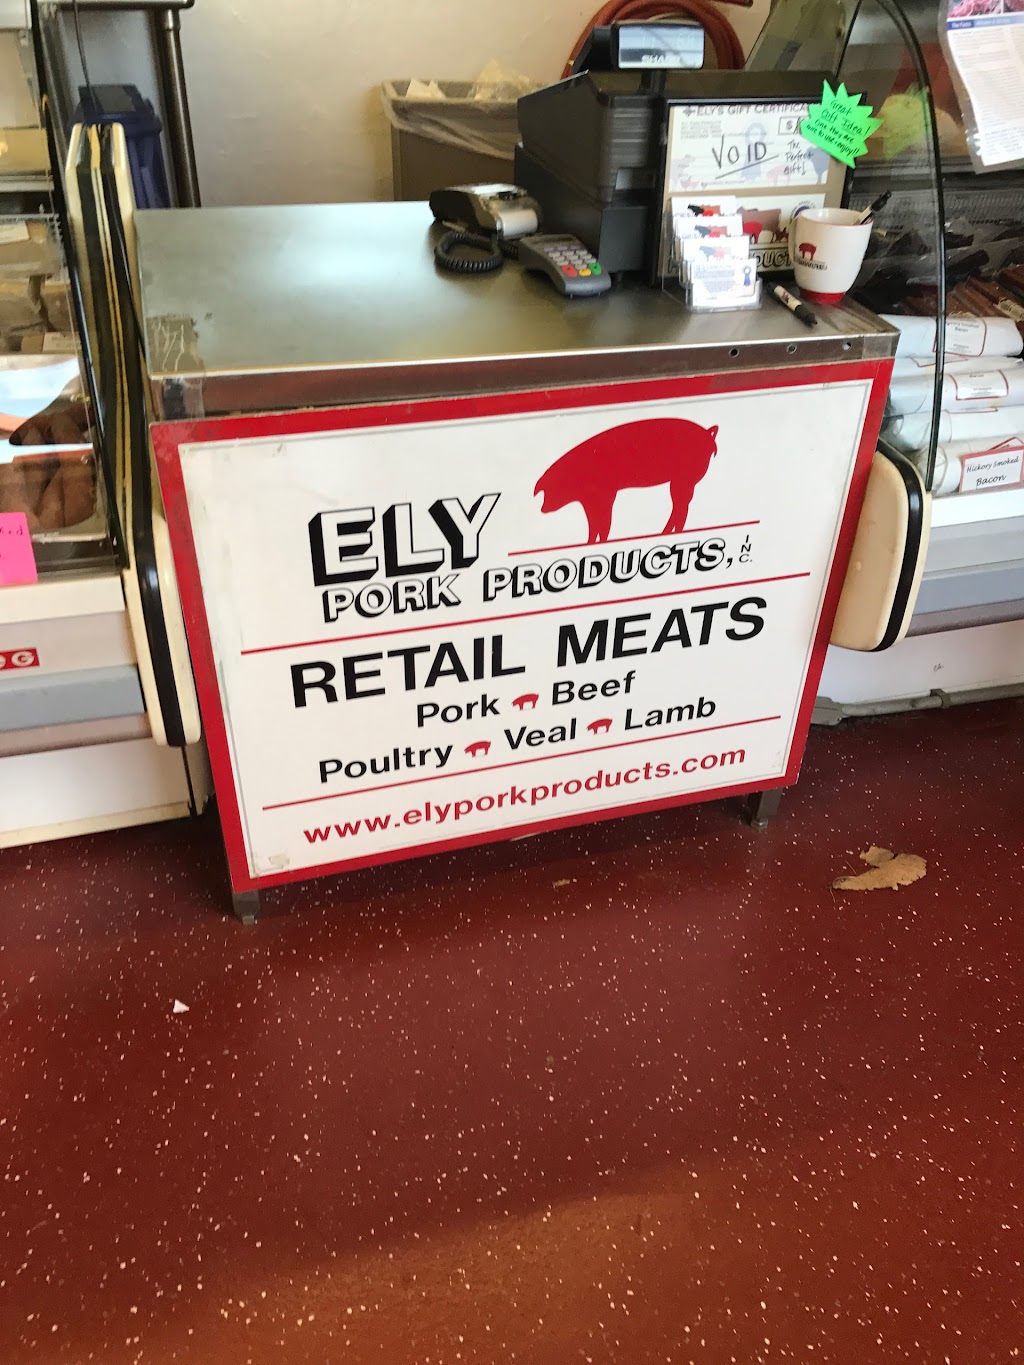 Ely Farm Products | 401 Woodhill Rd, Newtown, PA 18940 | Phone: (215) 860-0669